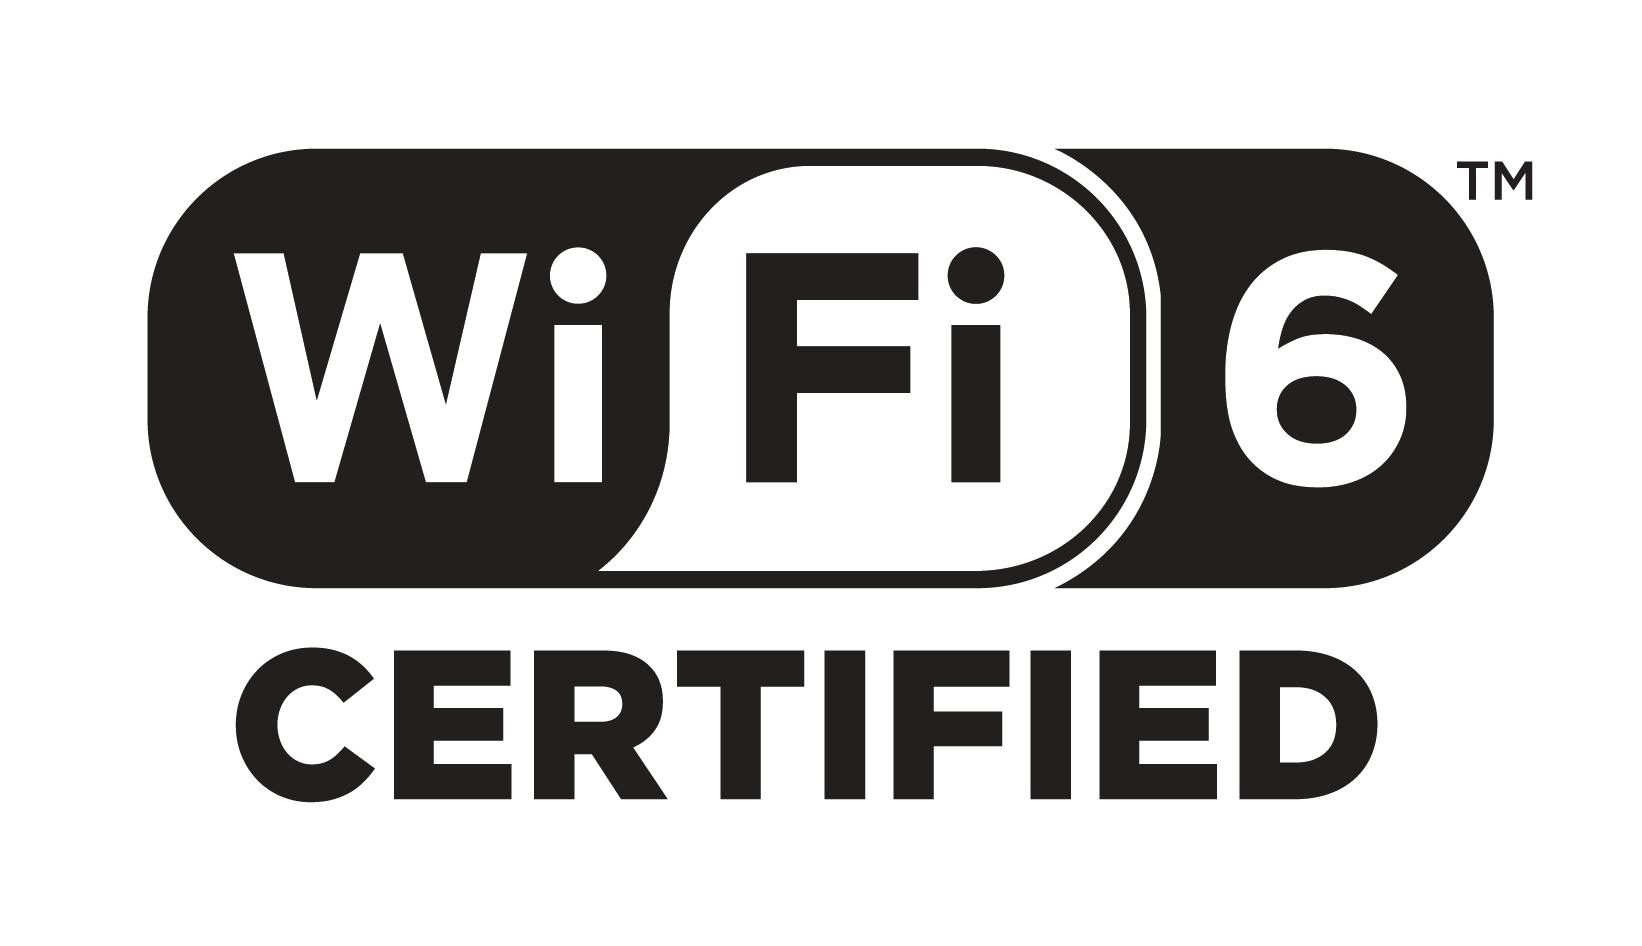 Can’t connect because you need a certificate to sign in to Wi-Fi Wi-Fi_CERTIFIED_6%E2%84%A2_high-res.png